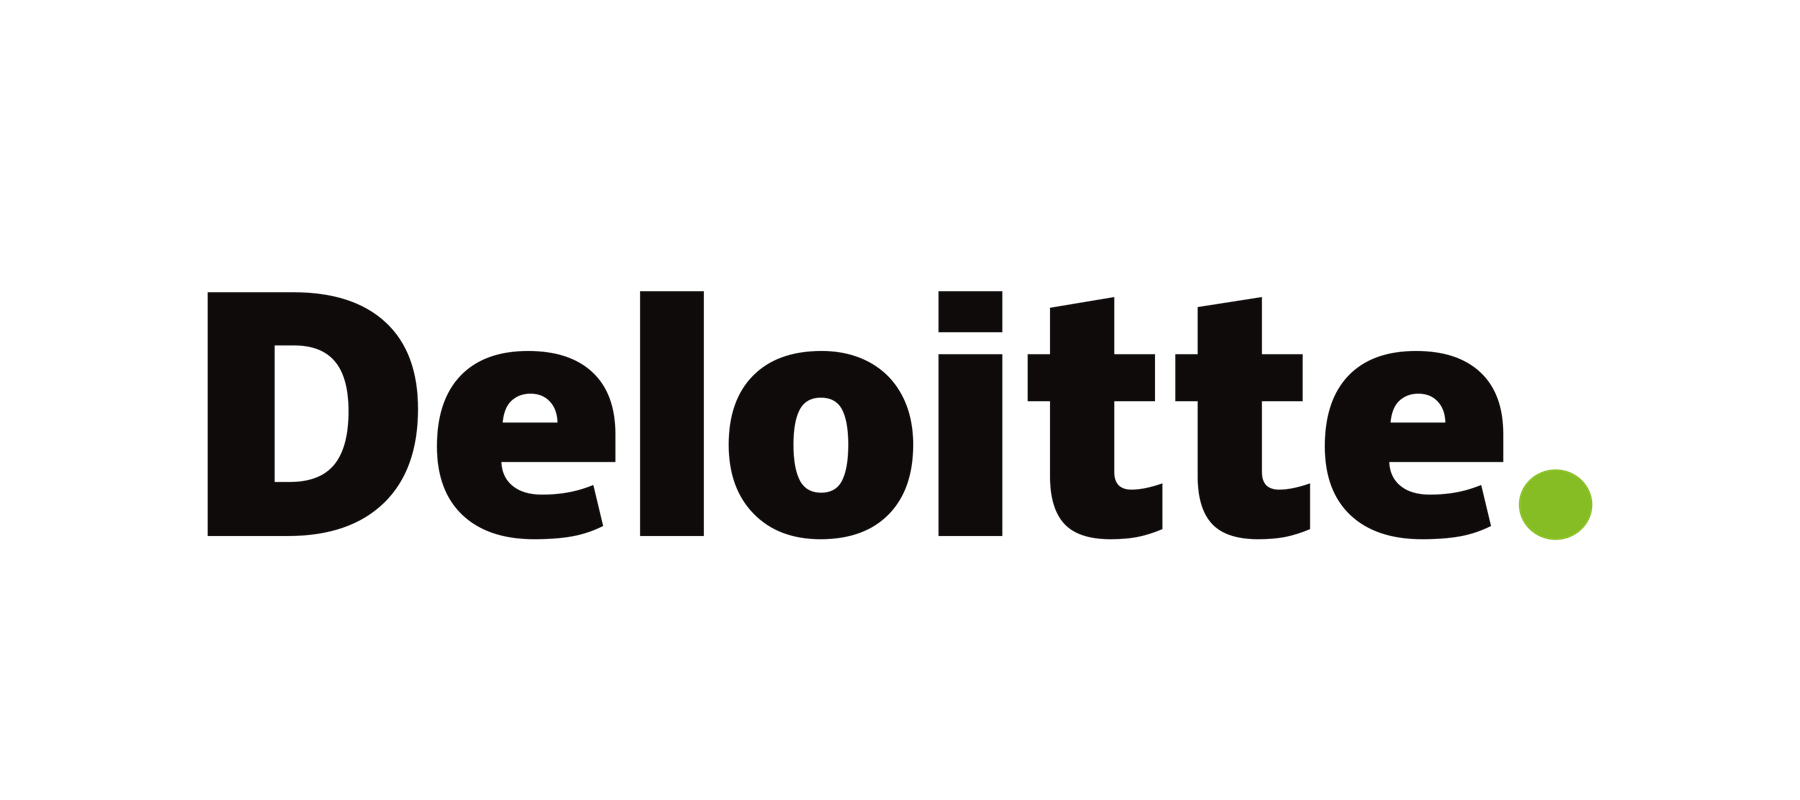 Deloitte is the world’s most valuable commercial services brand, report